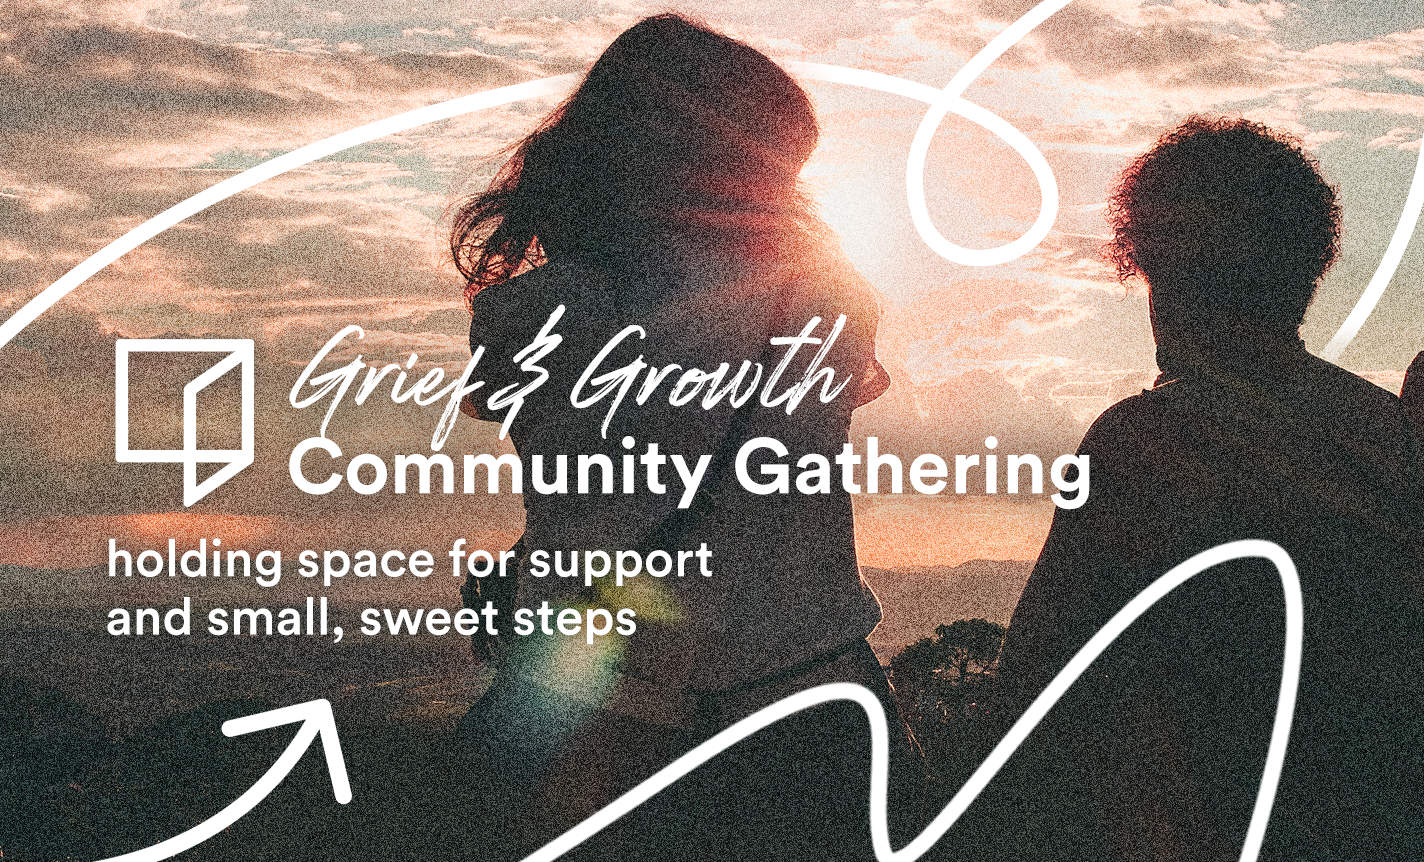 Grief & Growth Community Gathering